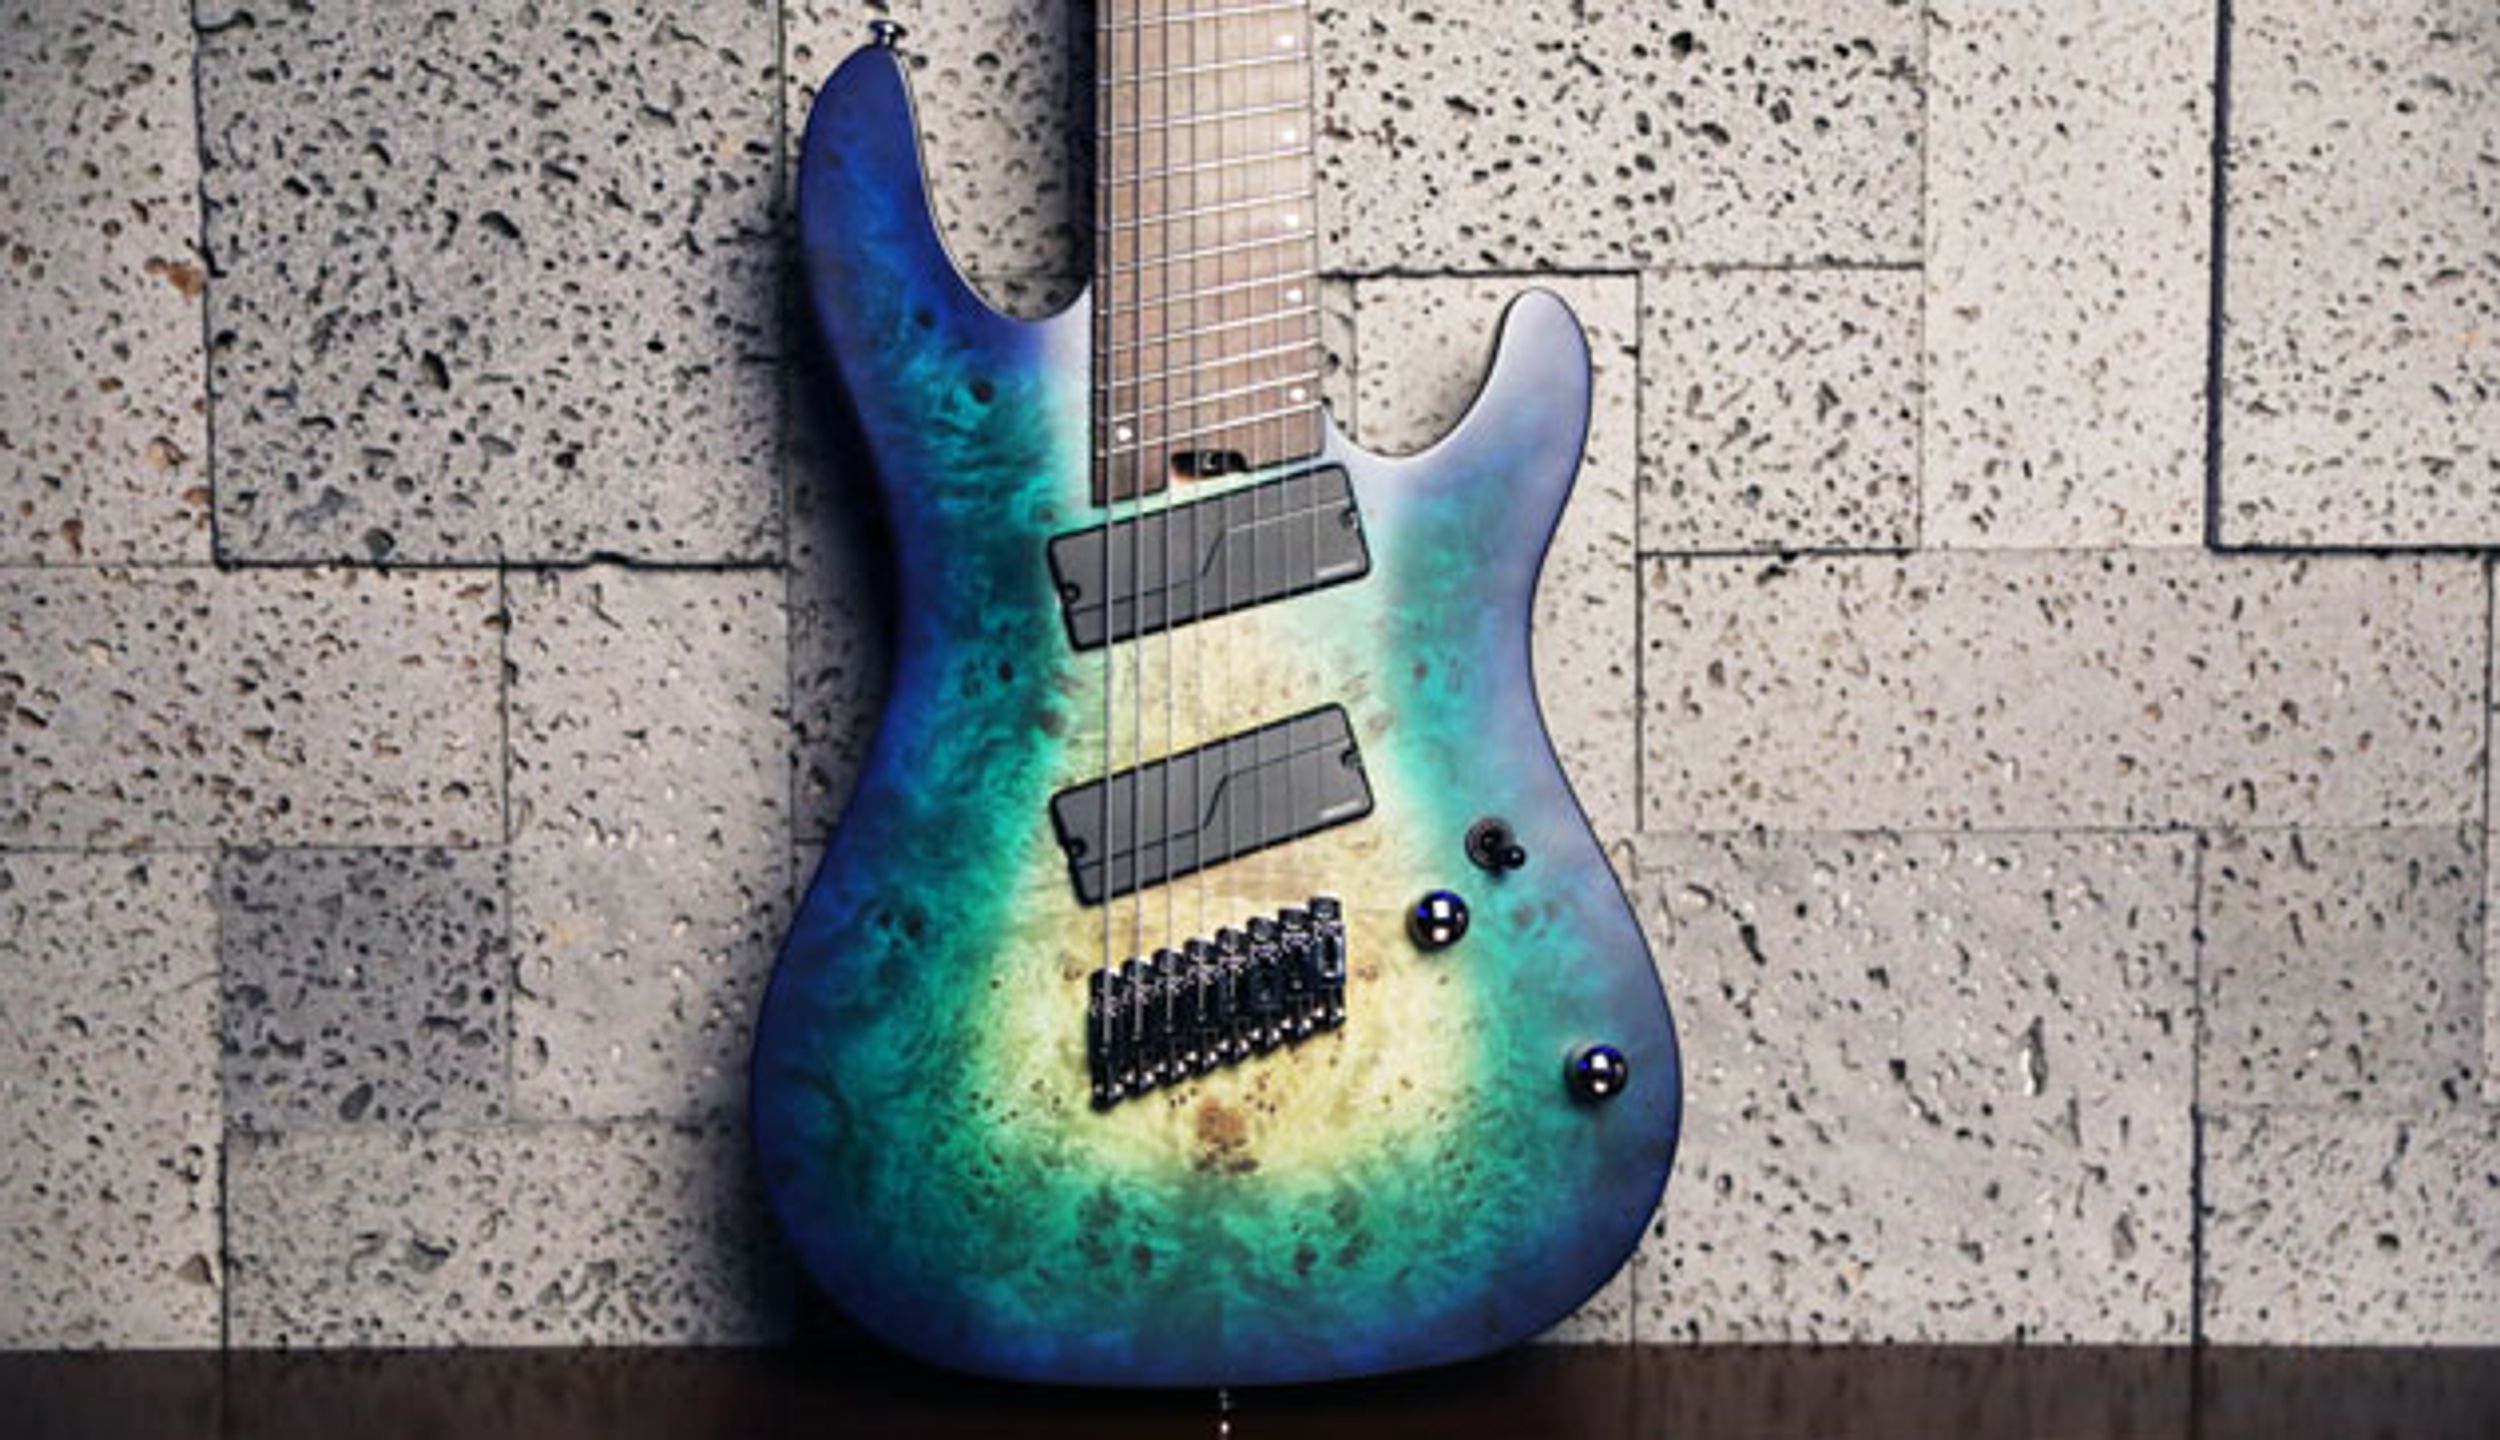 Cort Extends Range of KX Series with New 8-String Model